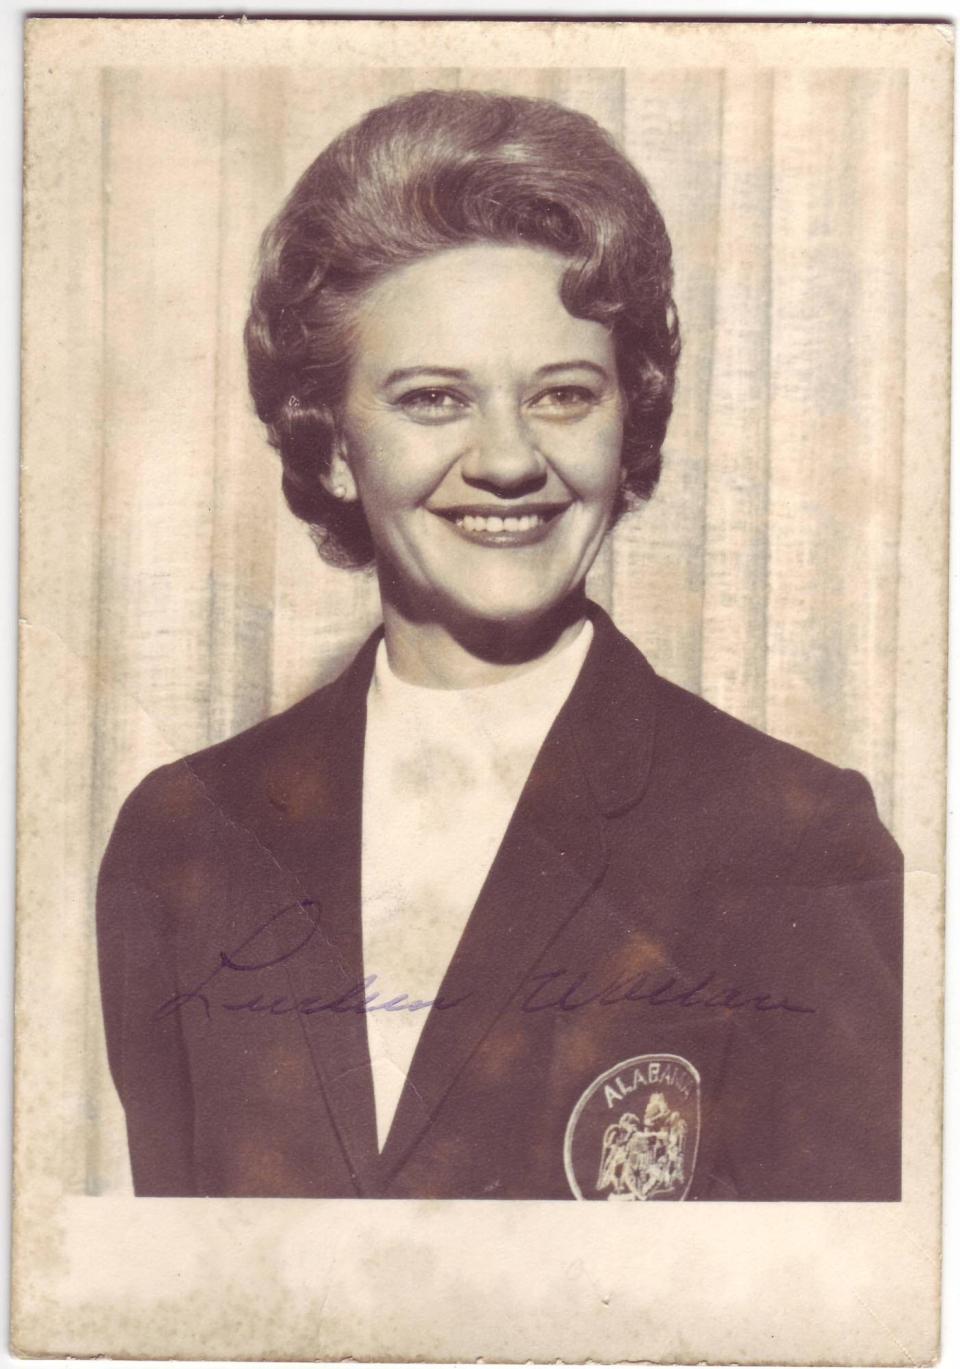 Lurleen B. Wallace, who was born in Tuscaloosa, was elected governor of Alabama in 1966, the first woman to hold the office. She died of cancer after 16 months in office.